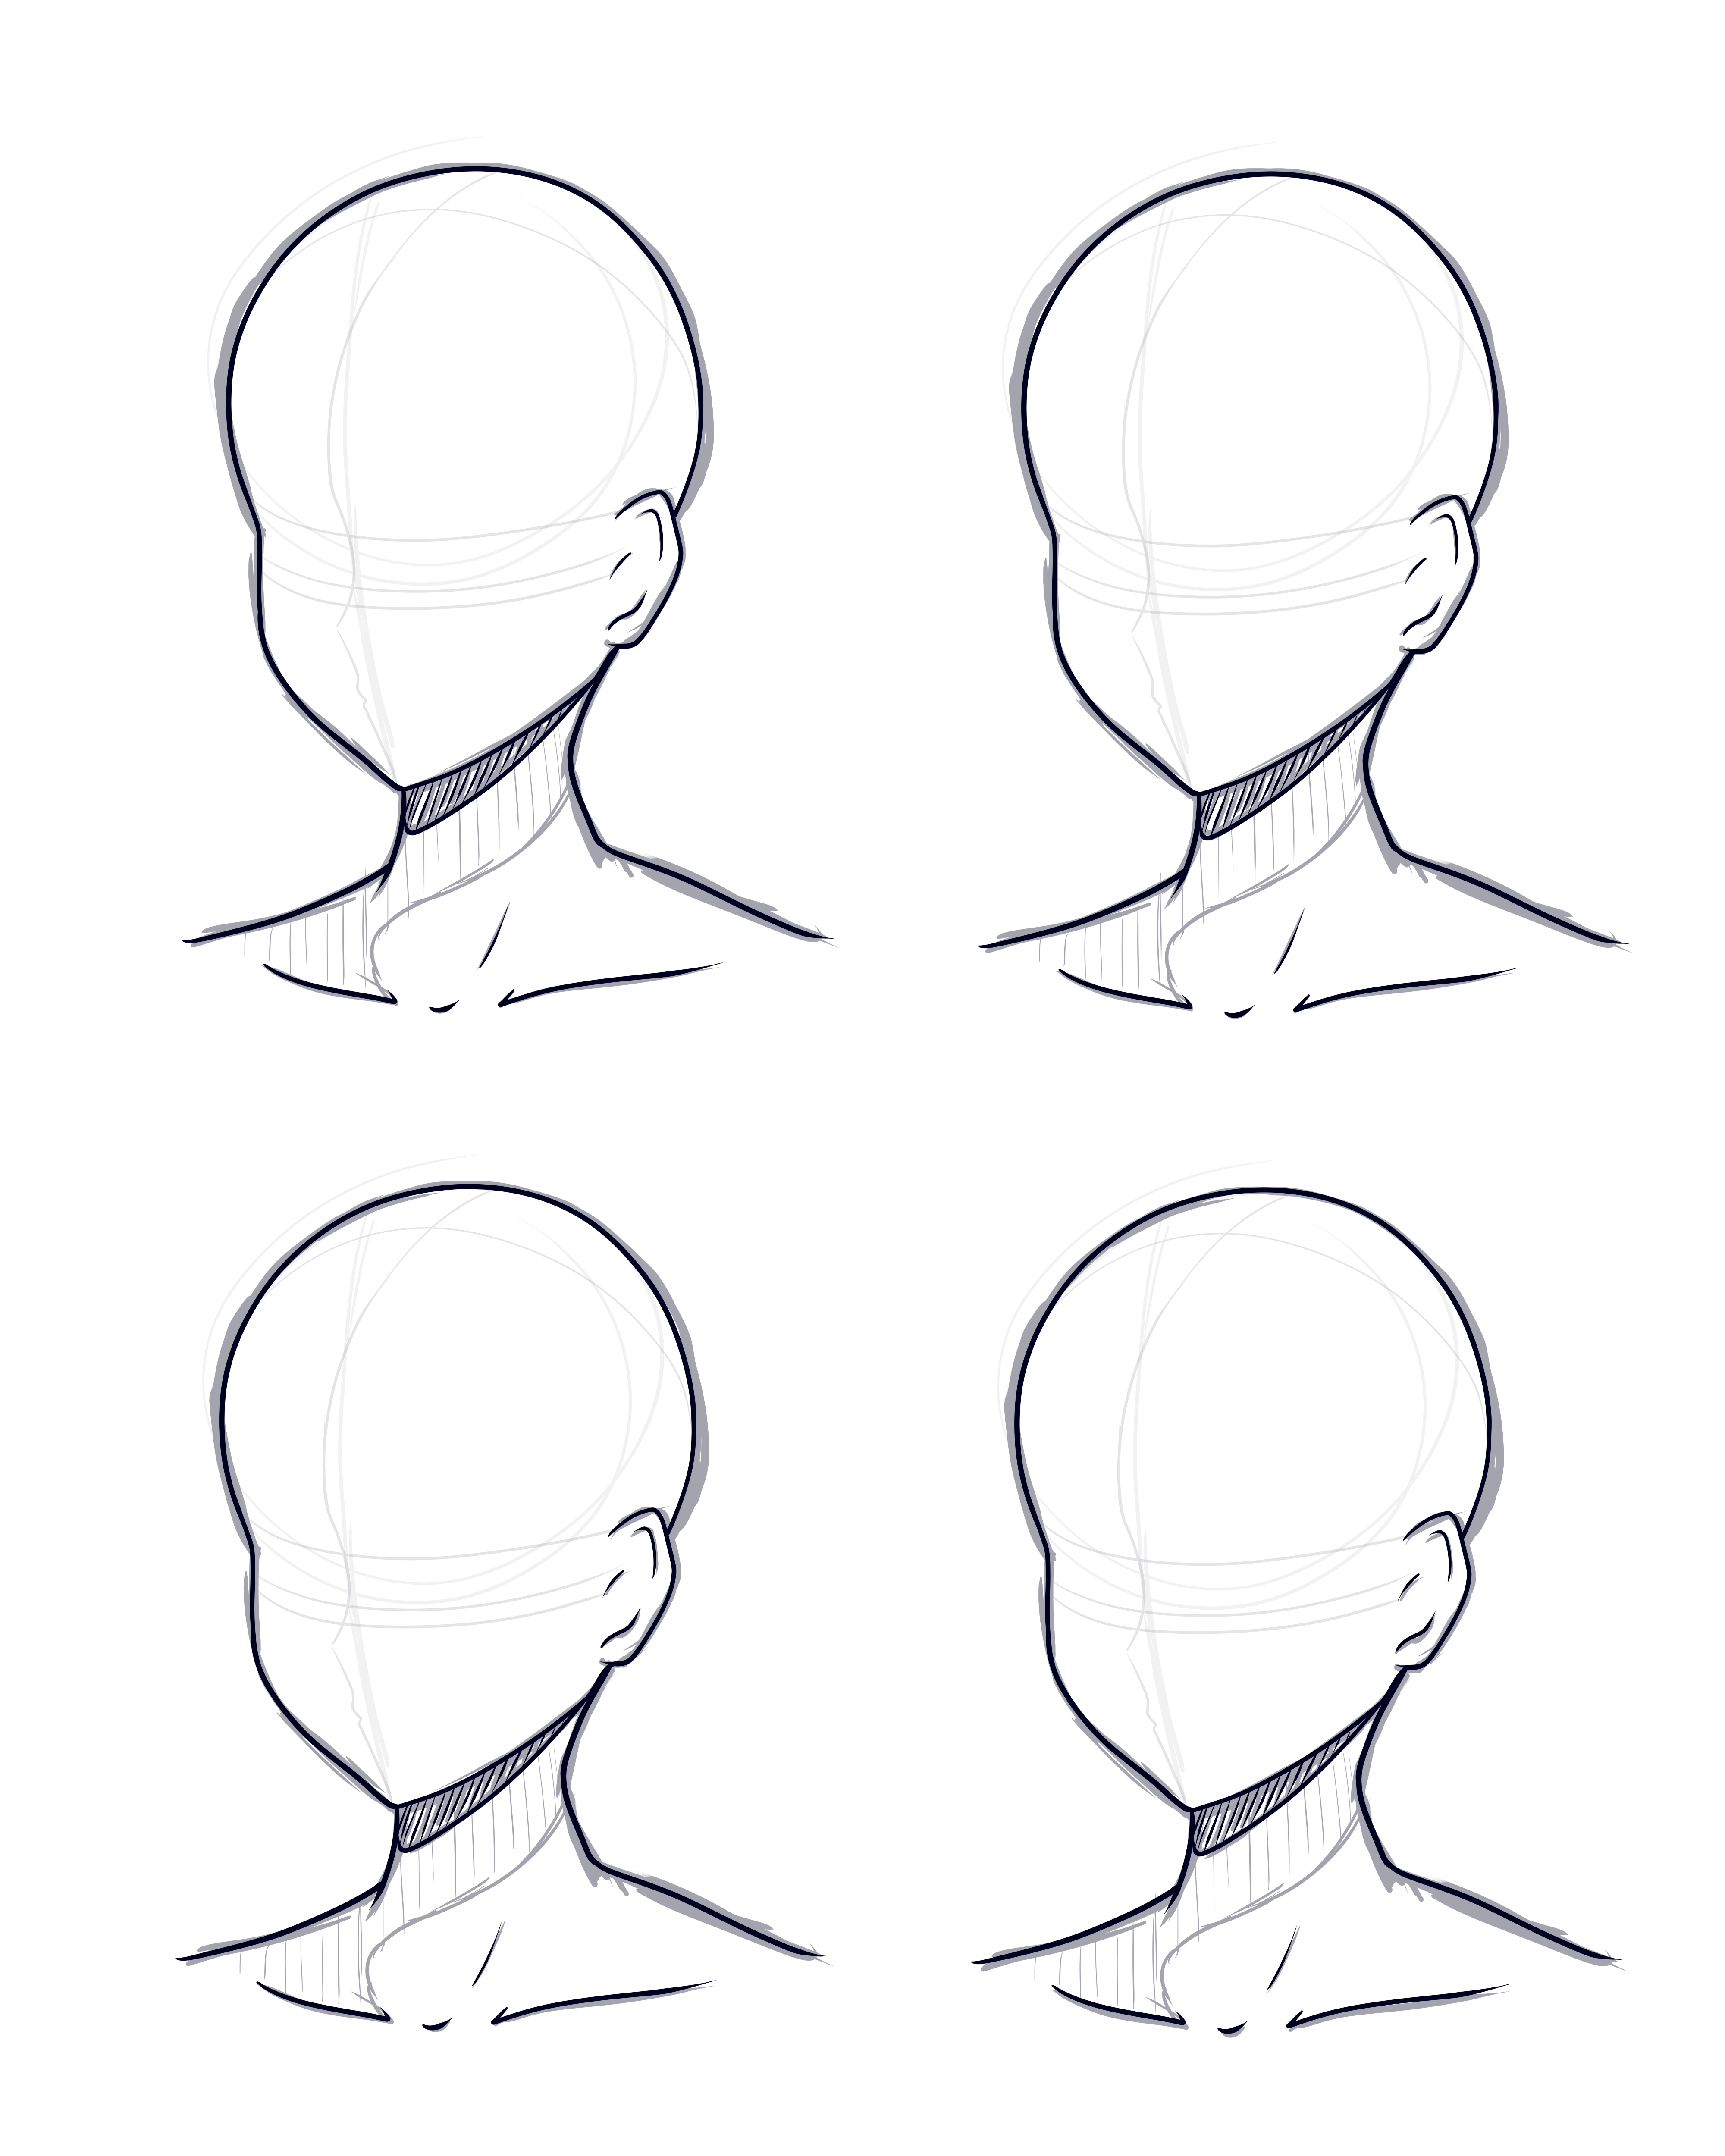 Head Design Base (Sketch and Lineart) by Sayuqt on DeviantArt